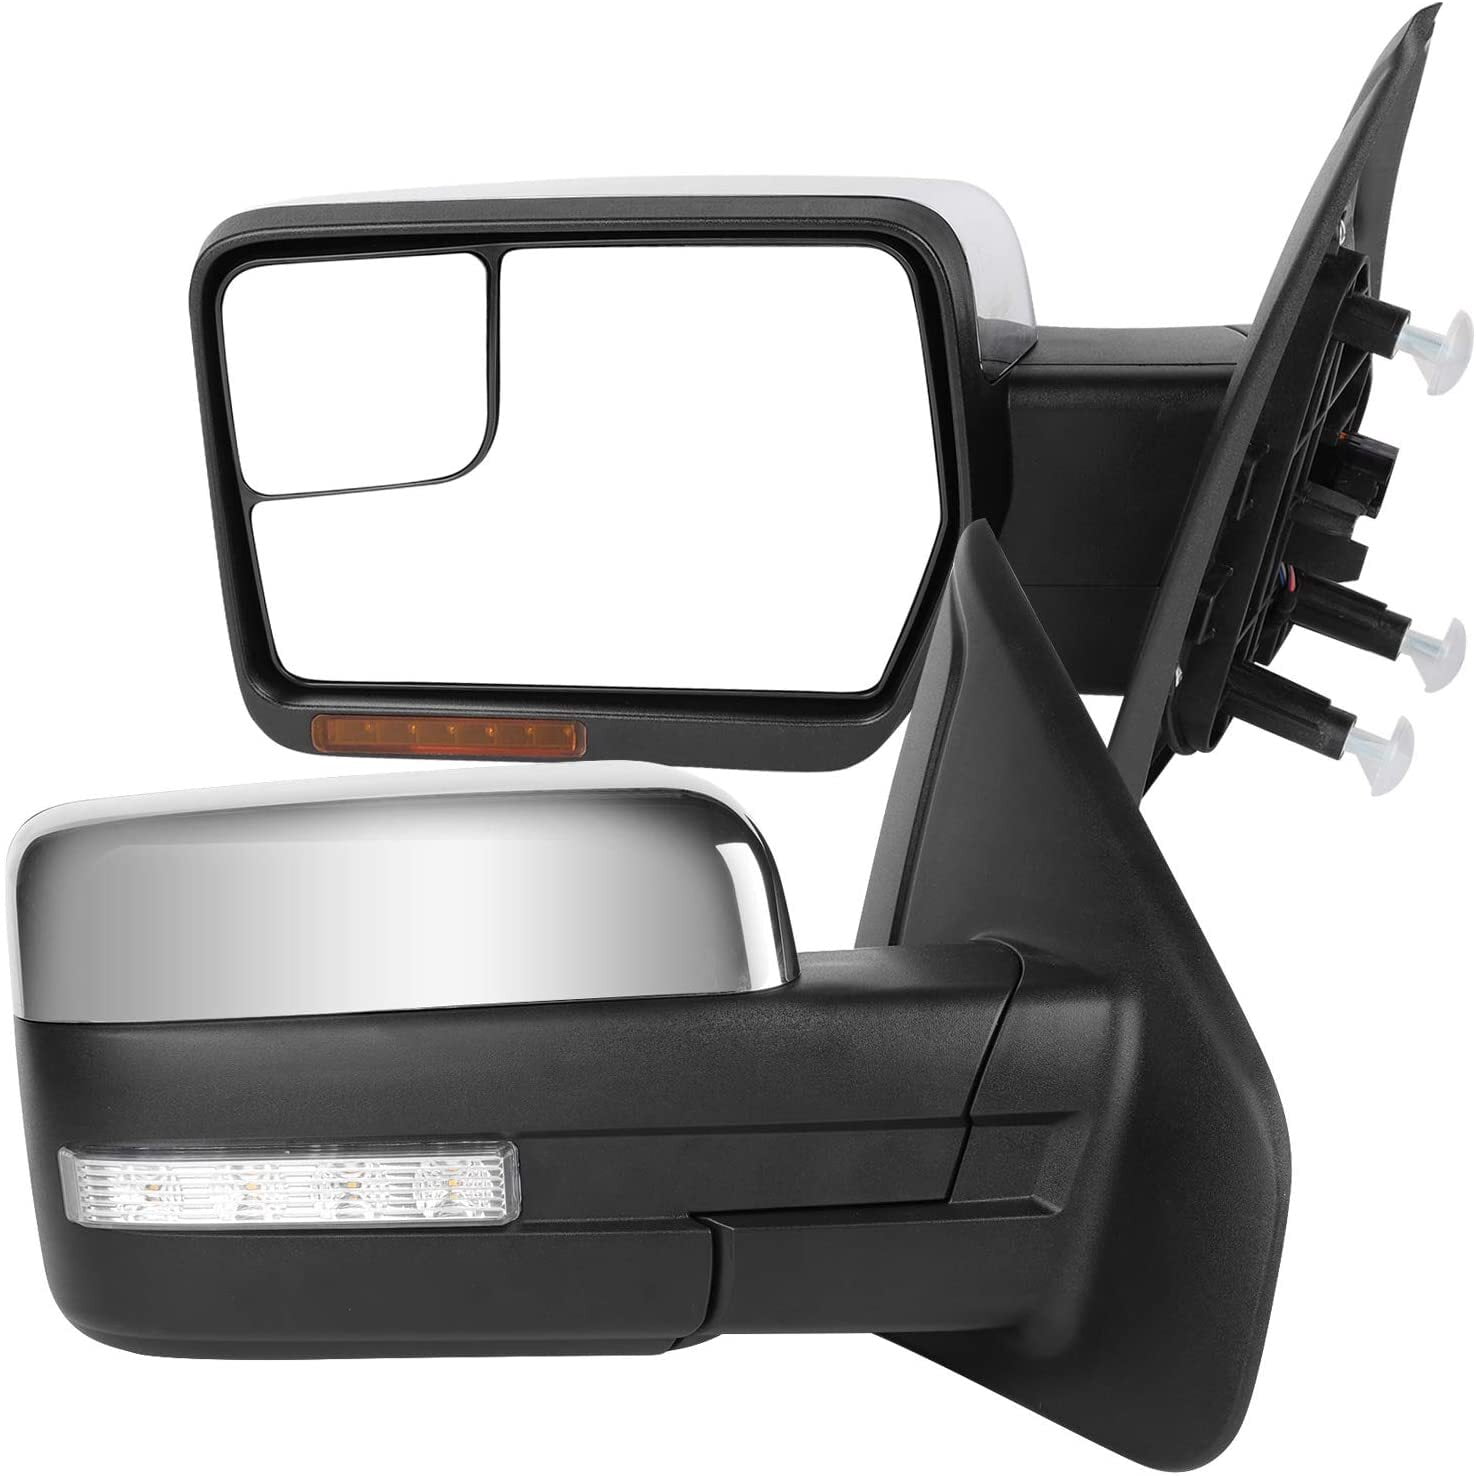 AUTOMUTO Towing Mirrors Left and Right Side Tow Mirrors Power Adjusted Heated Turn Signal Puddle Clearance Auxiliary Light Chrome Housing Fit Compatible with 2004-2014 For Ford F-150 Pickup Truck 